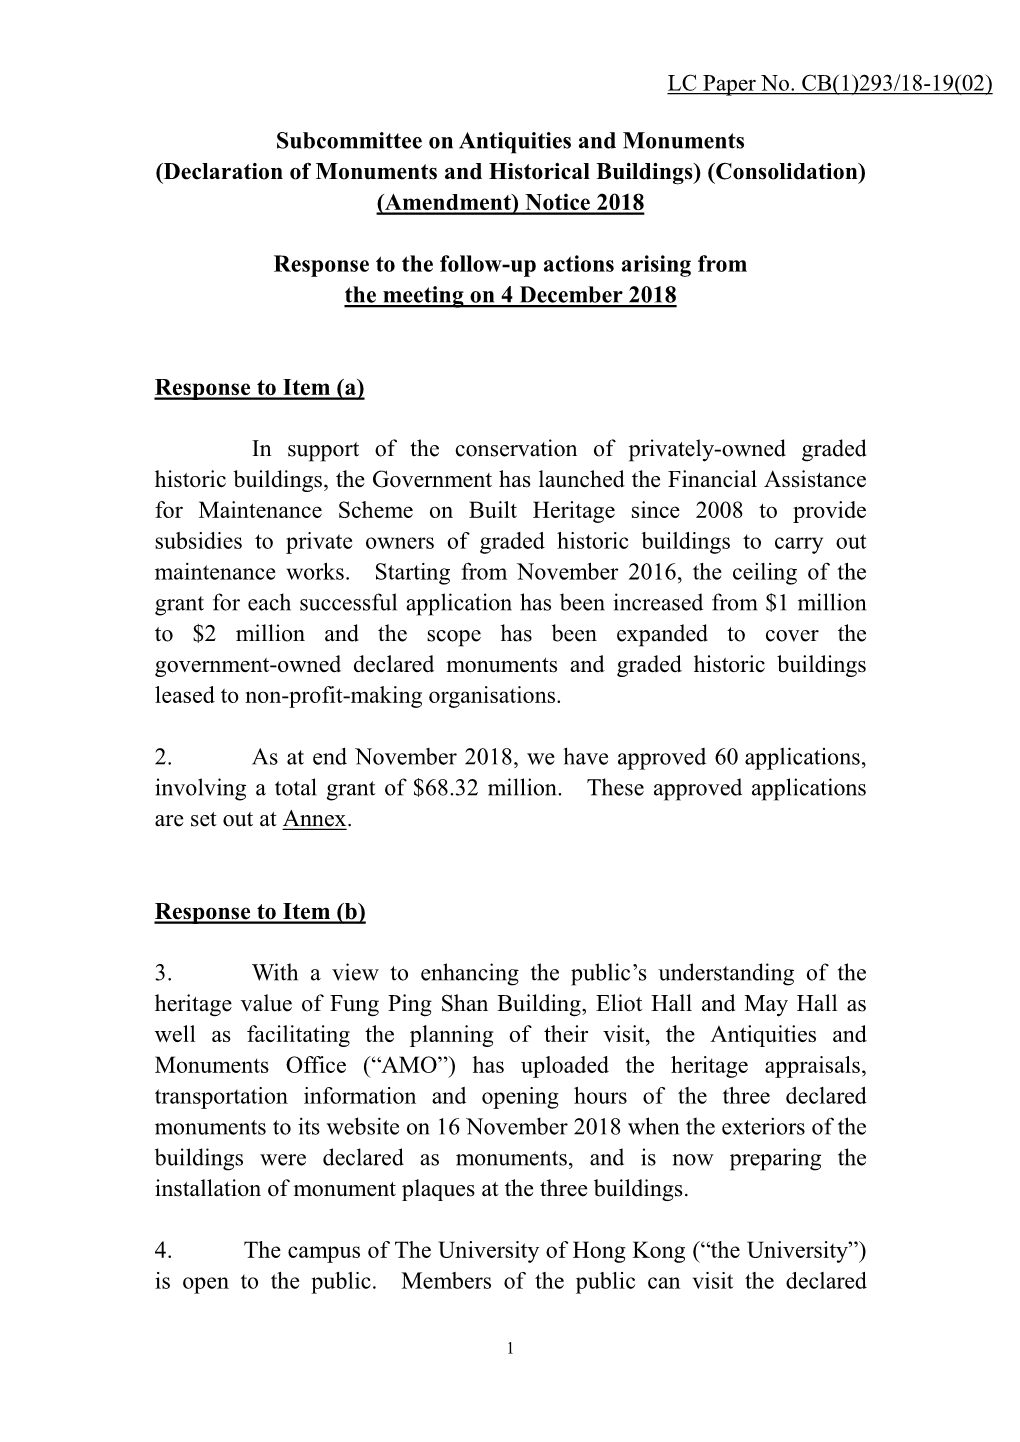 Subcommittee on Antiquities and Monuments (Declaration of Monuments and Historical Buildings) (Consolidation) (Amendment) Notice 2018